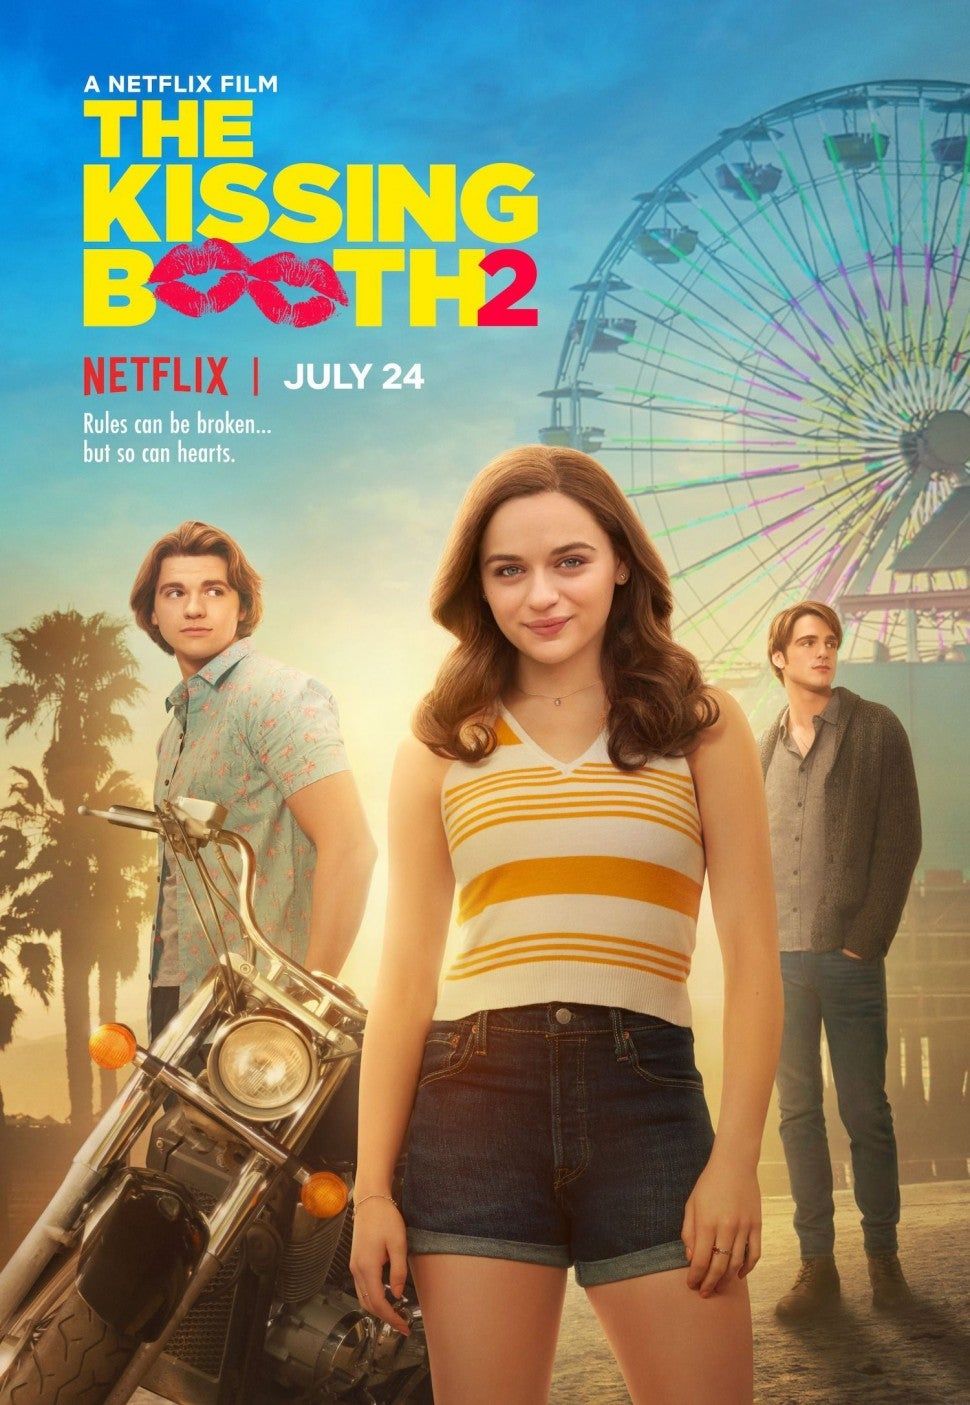 The Kissing Booth 2' Trailer: Joey King and Jacob Elordi Struggle